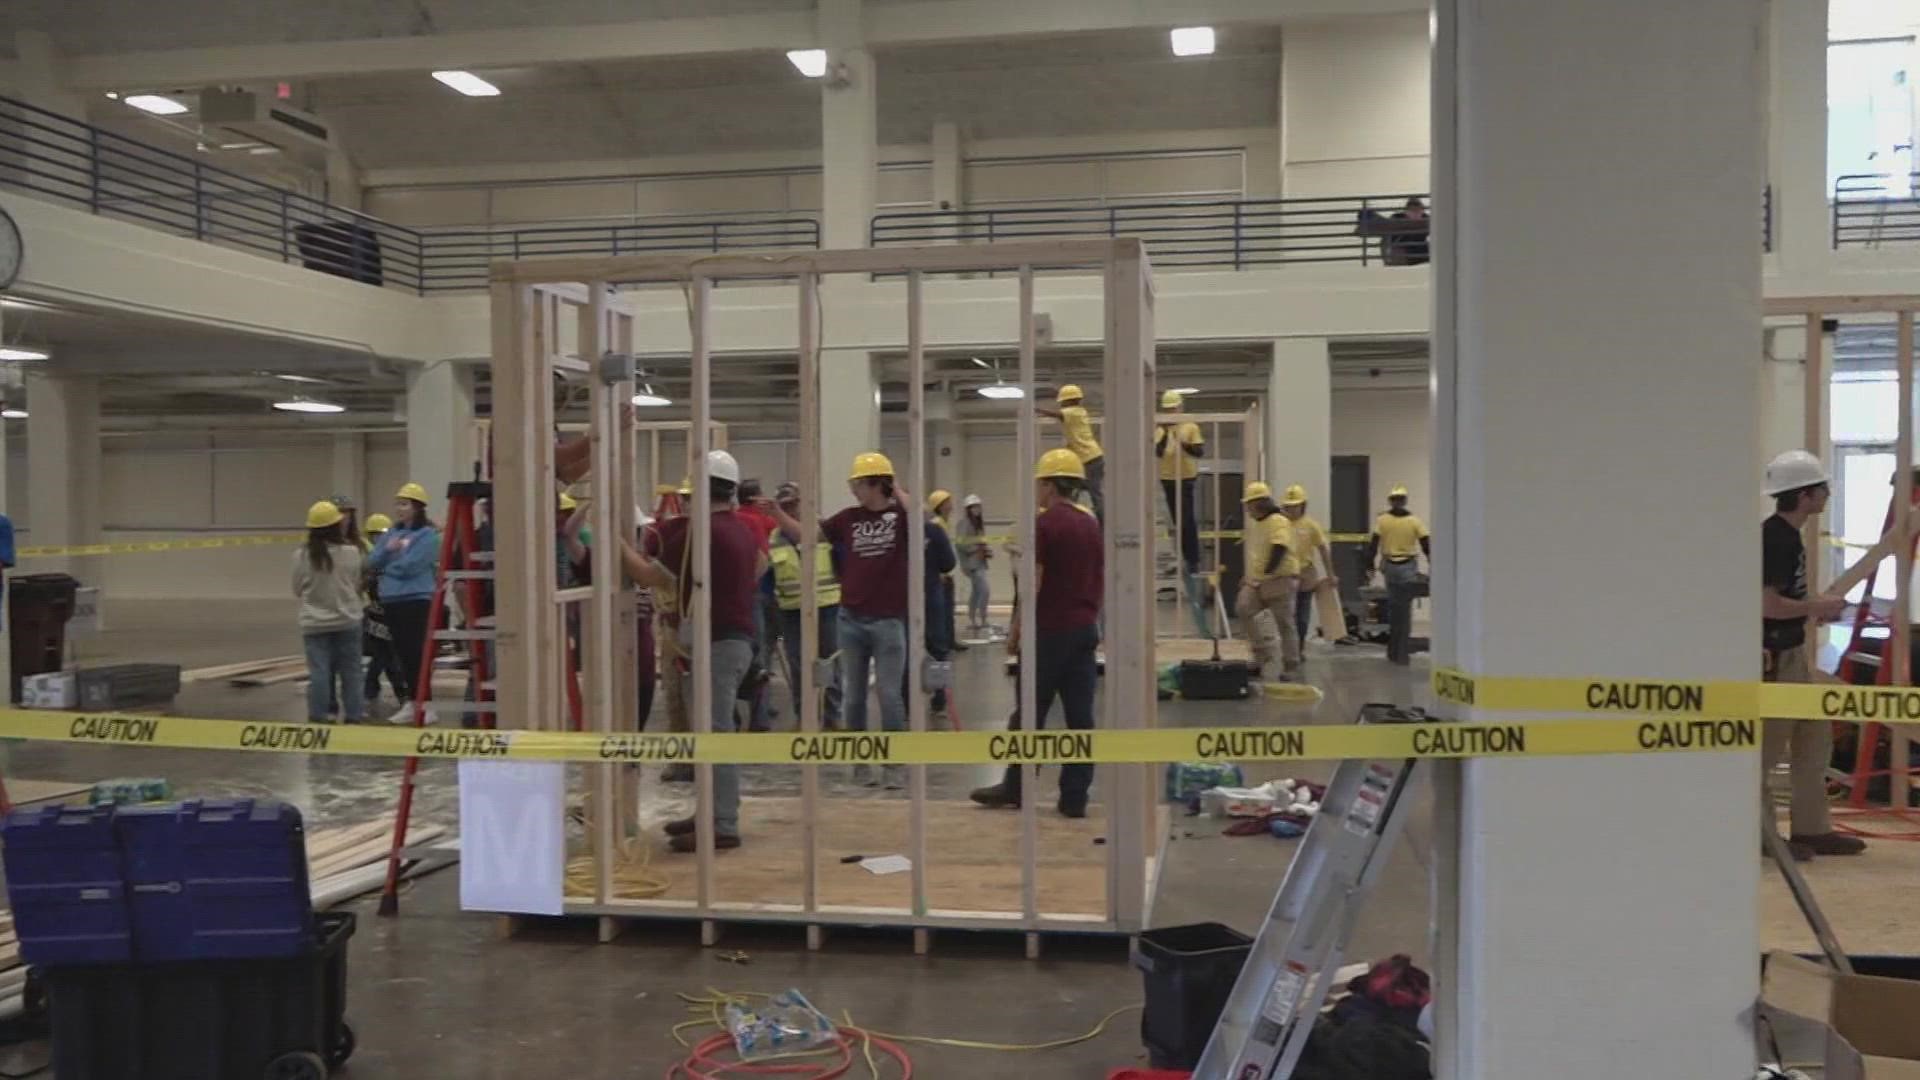 More than 100 students from across East Tennessee competed in the Builders Exchange of Tennessee second annual construction trades competition.